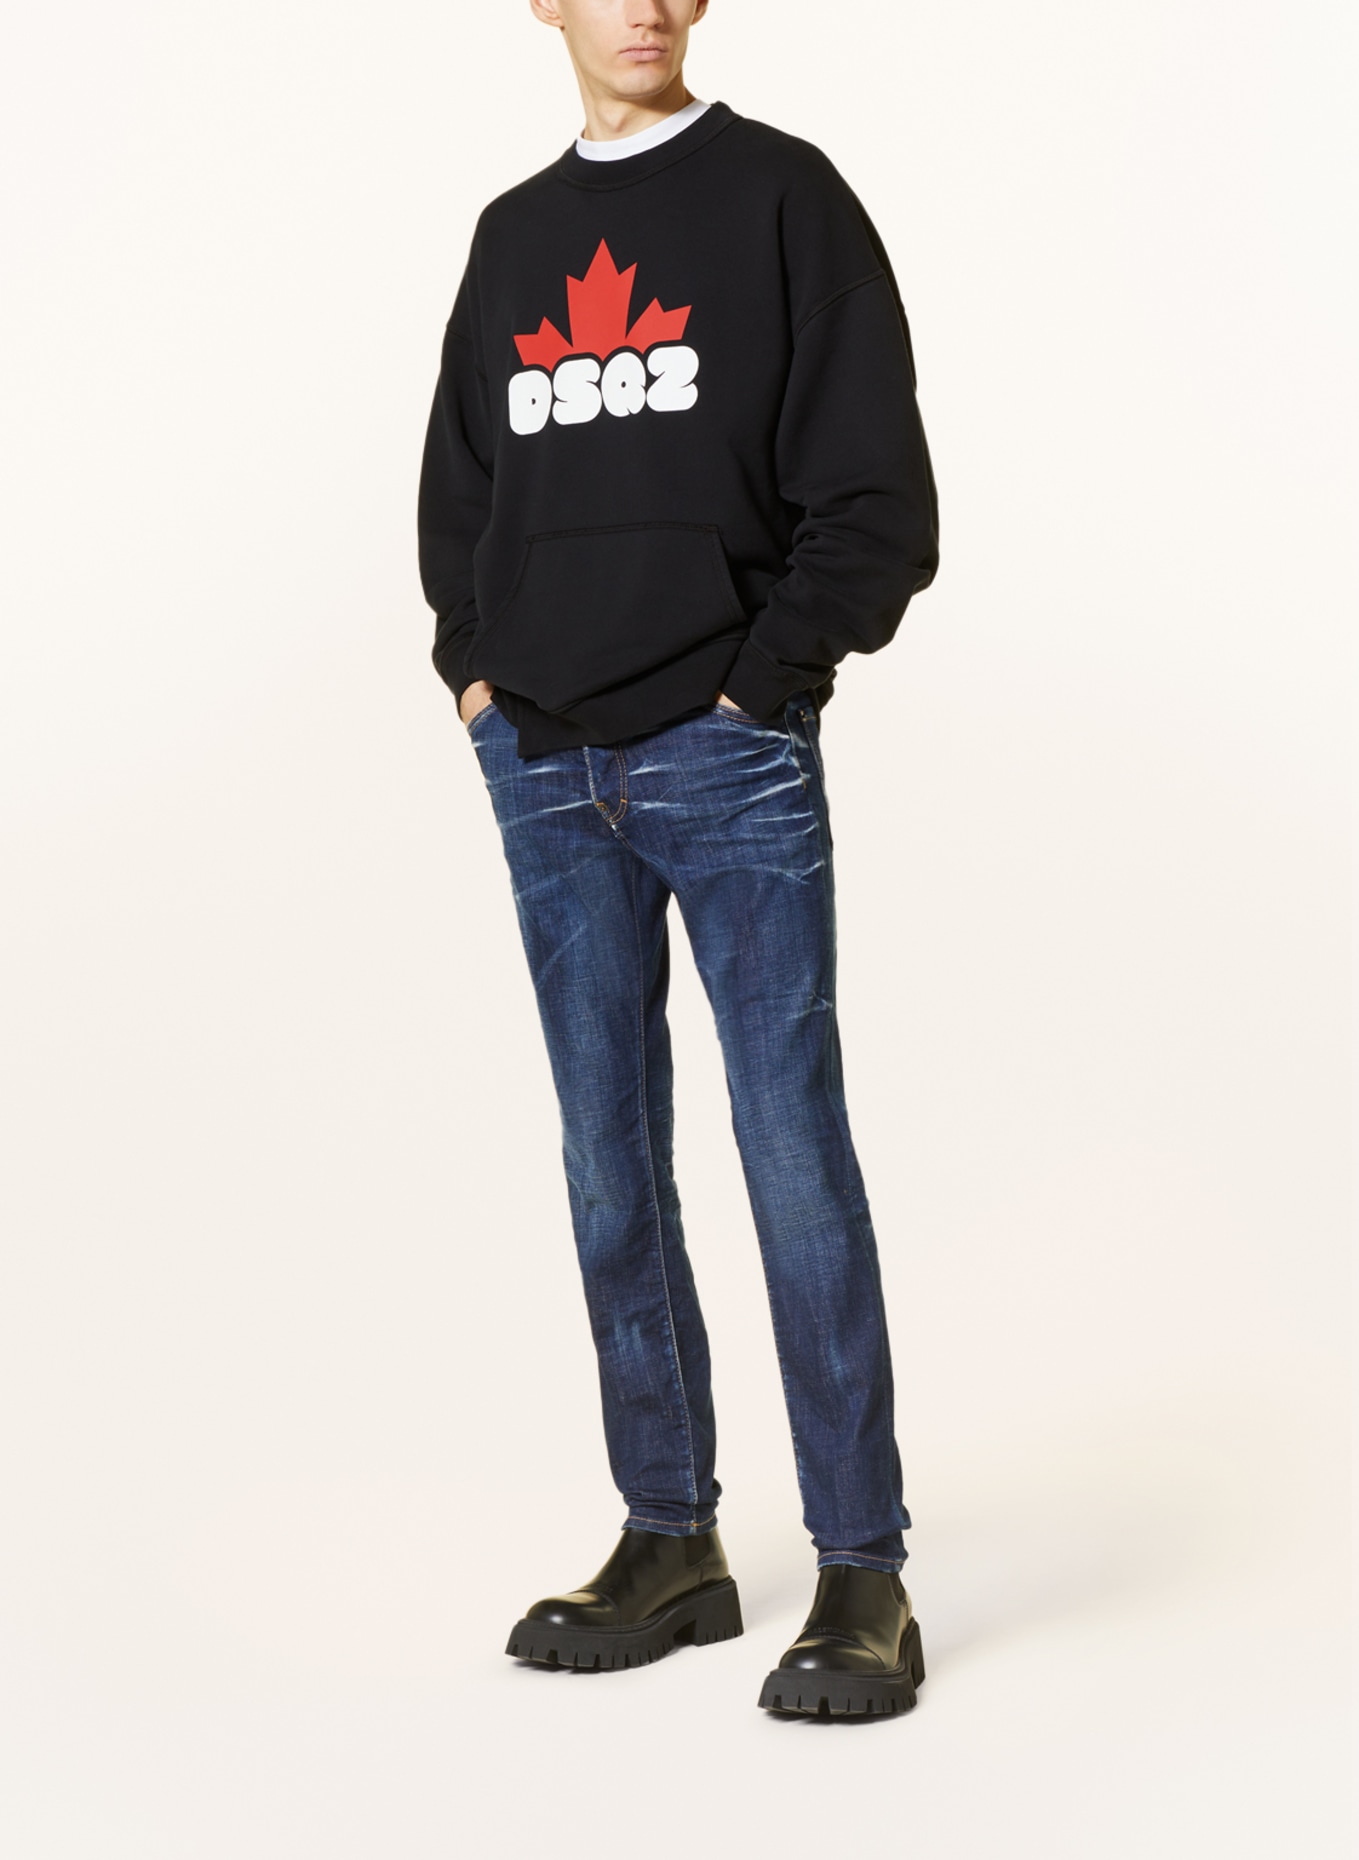 DSQUARED2 Jeans COOL GUY extra slim fit, Color: 470 NAVY BLUE (Image 2)